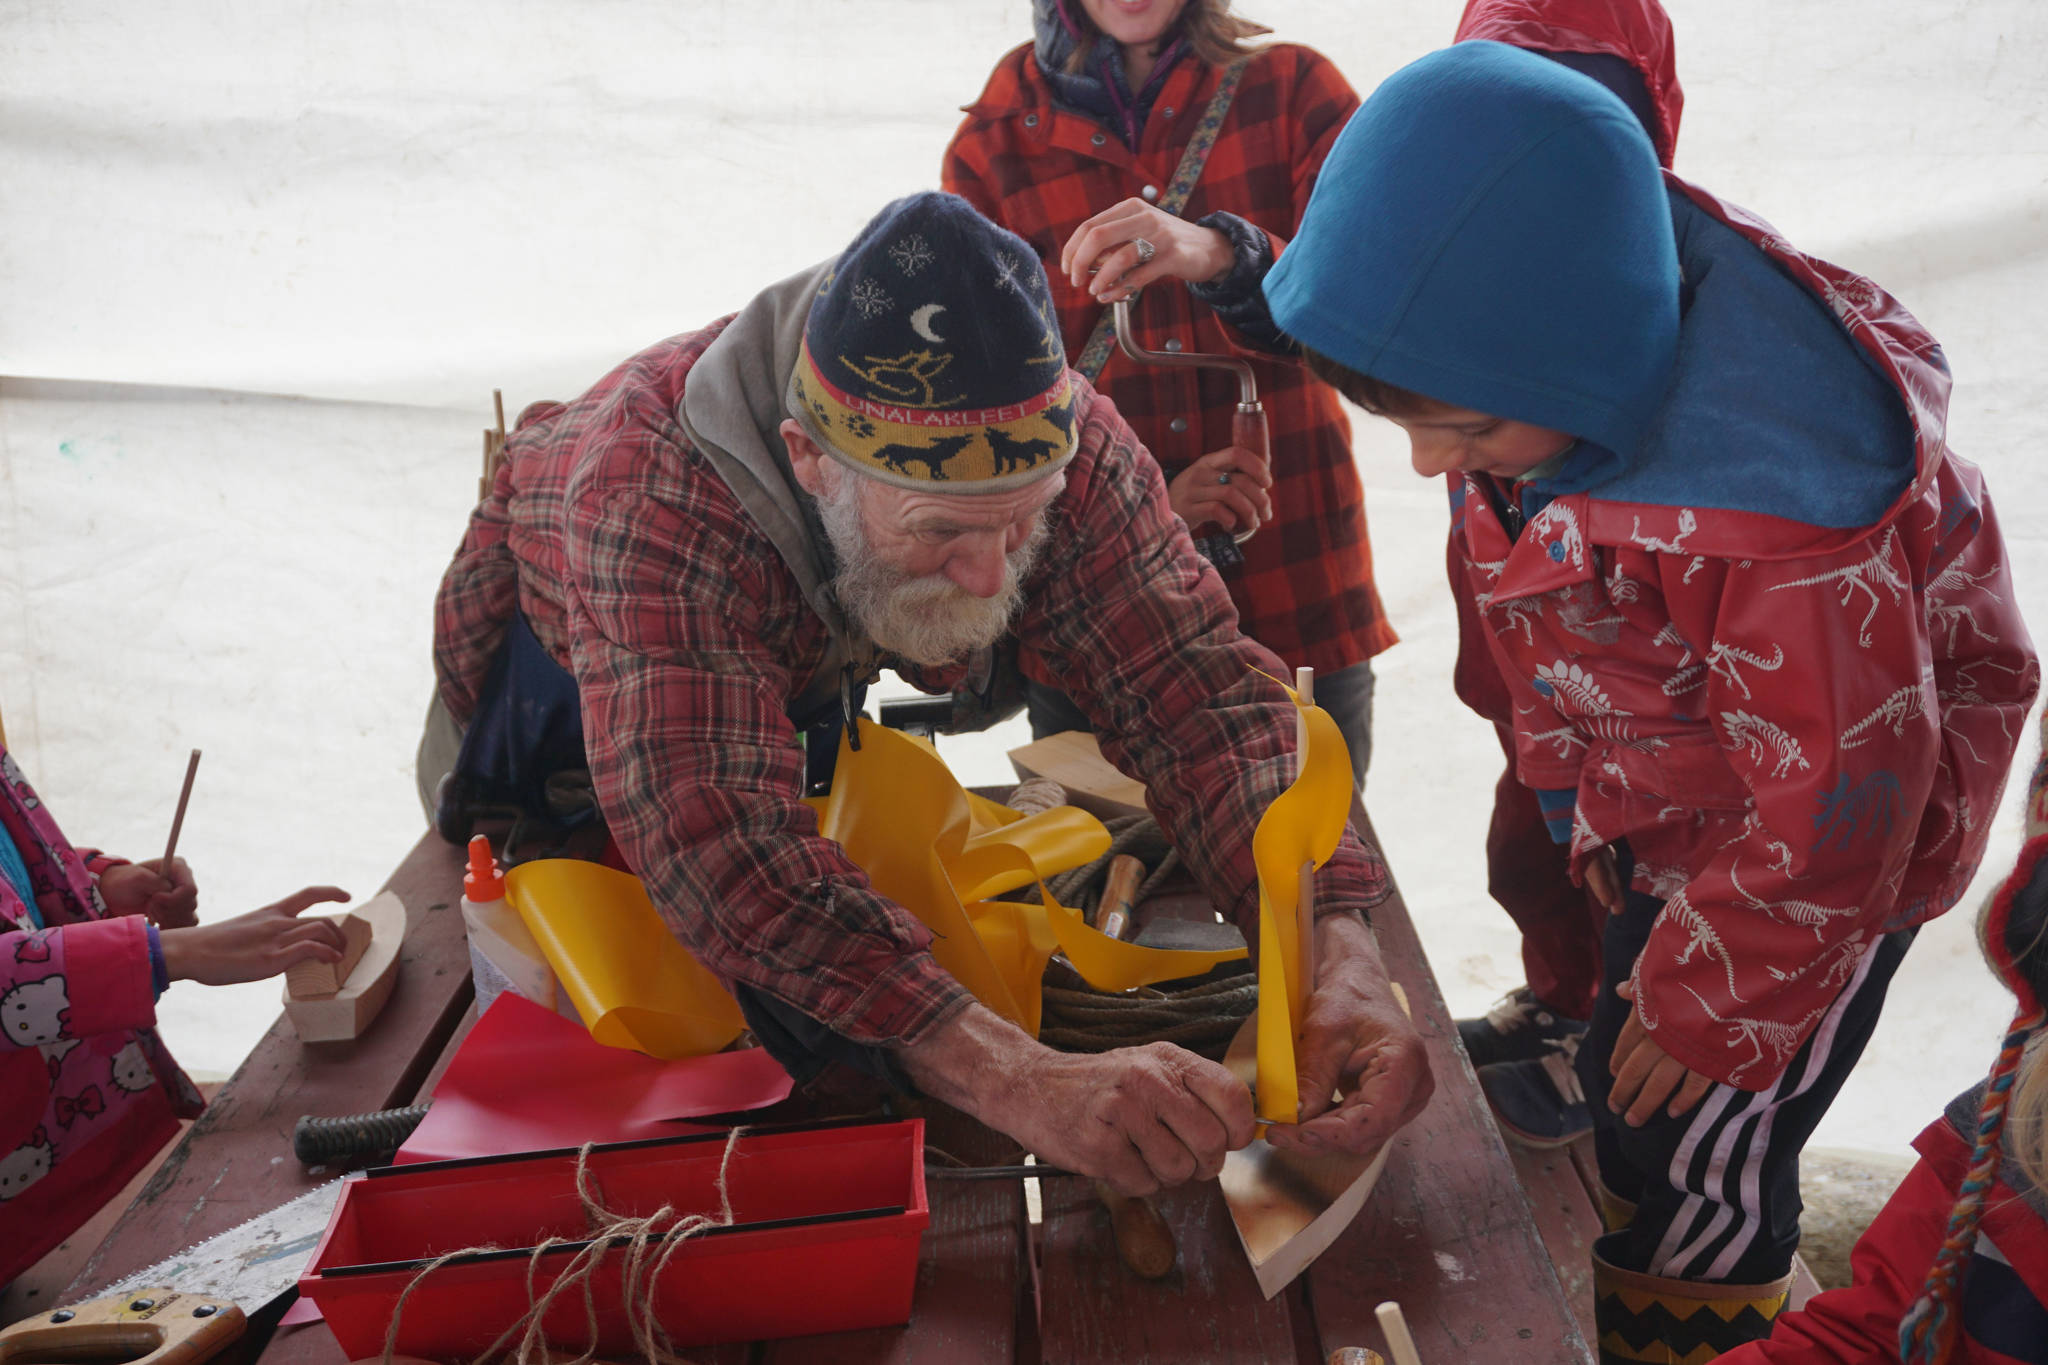 John Miles, left, helps Ike Mitchell work on a boat during the Kachemak Bay Wooden Boat Society Festival on Saturday, Sept. 2, 2017 at the Nick Dudiak Fishing Lagoon campground in Homer, Alaska. Ike’s mother, Jamey Cloud, and his brother, Charlie Mitchell, watch. (File photo by Michael Armstrong/Homer News)